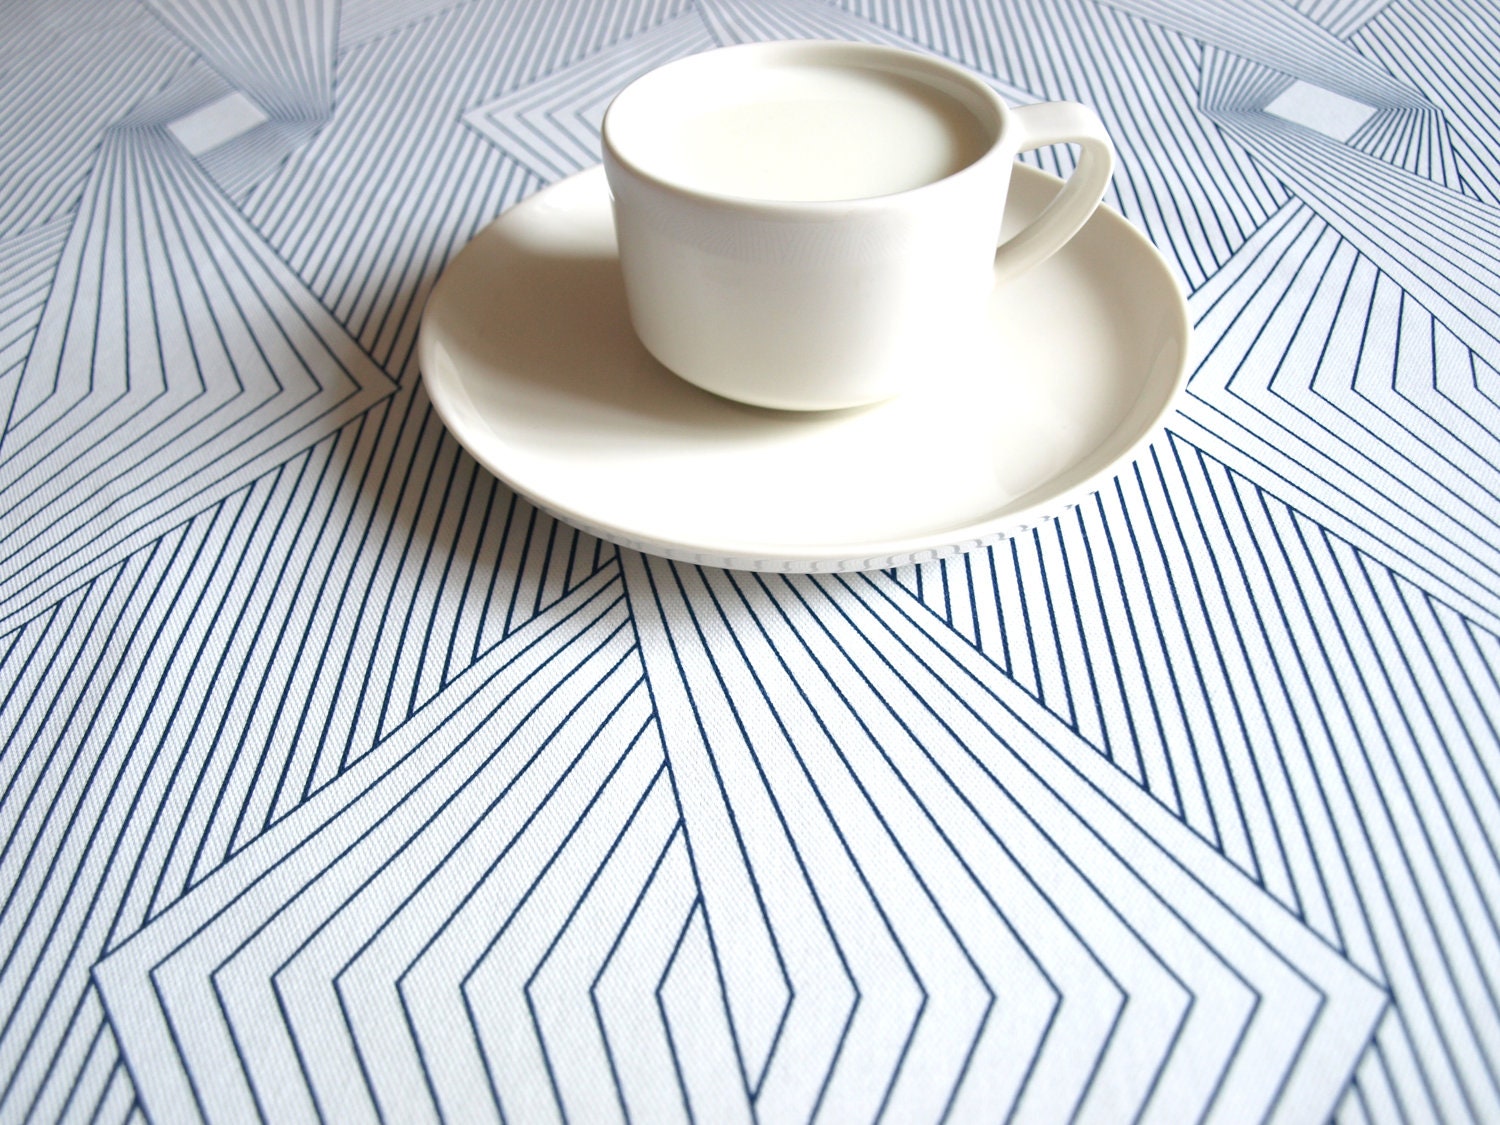 Table runner or napkins white navy blue graphic lines , also pillow cover available, great GIFT - Dreamzzzzz